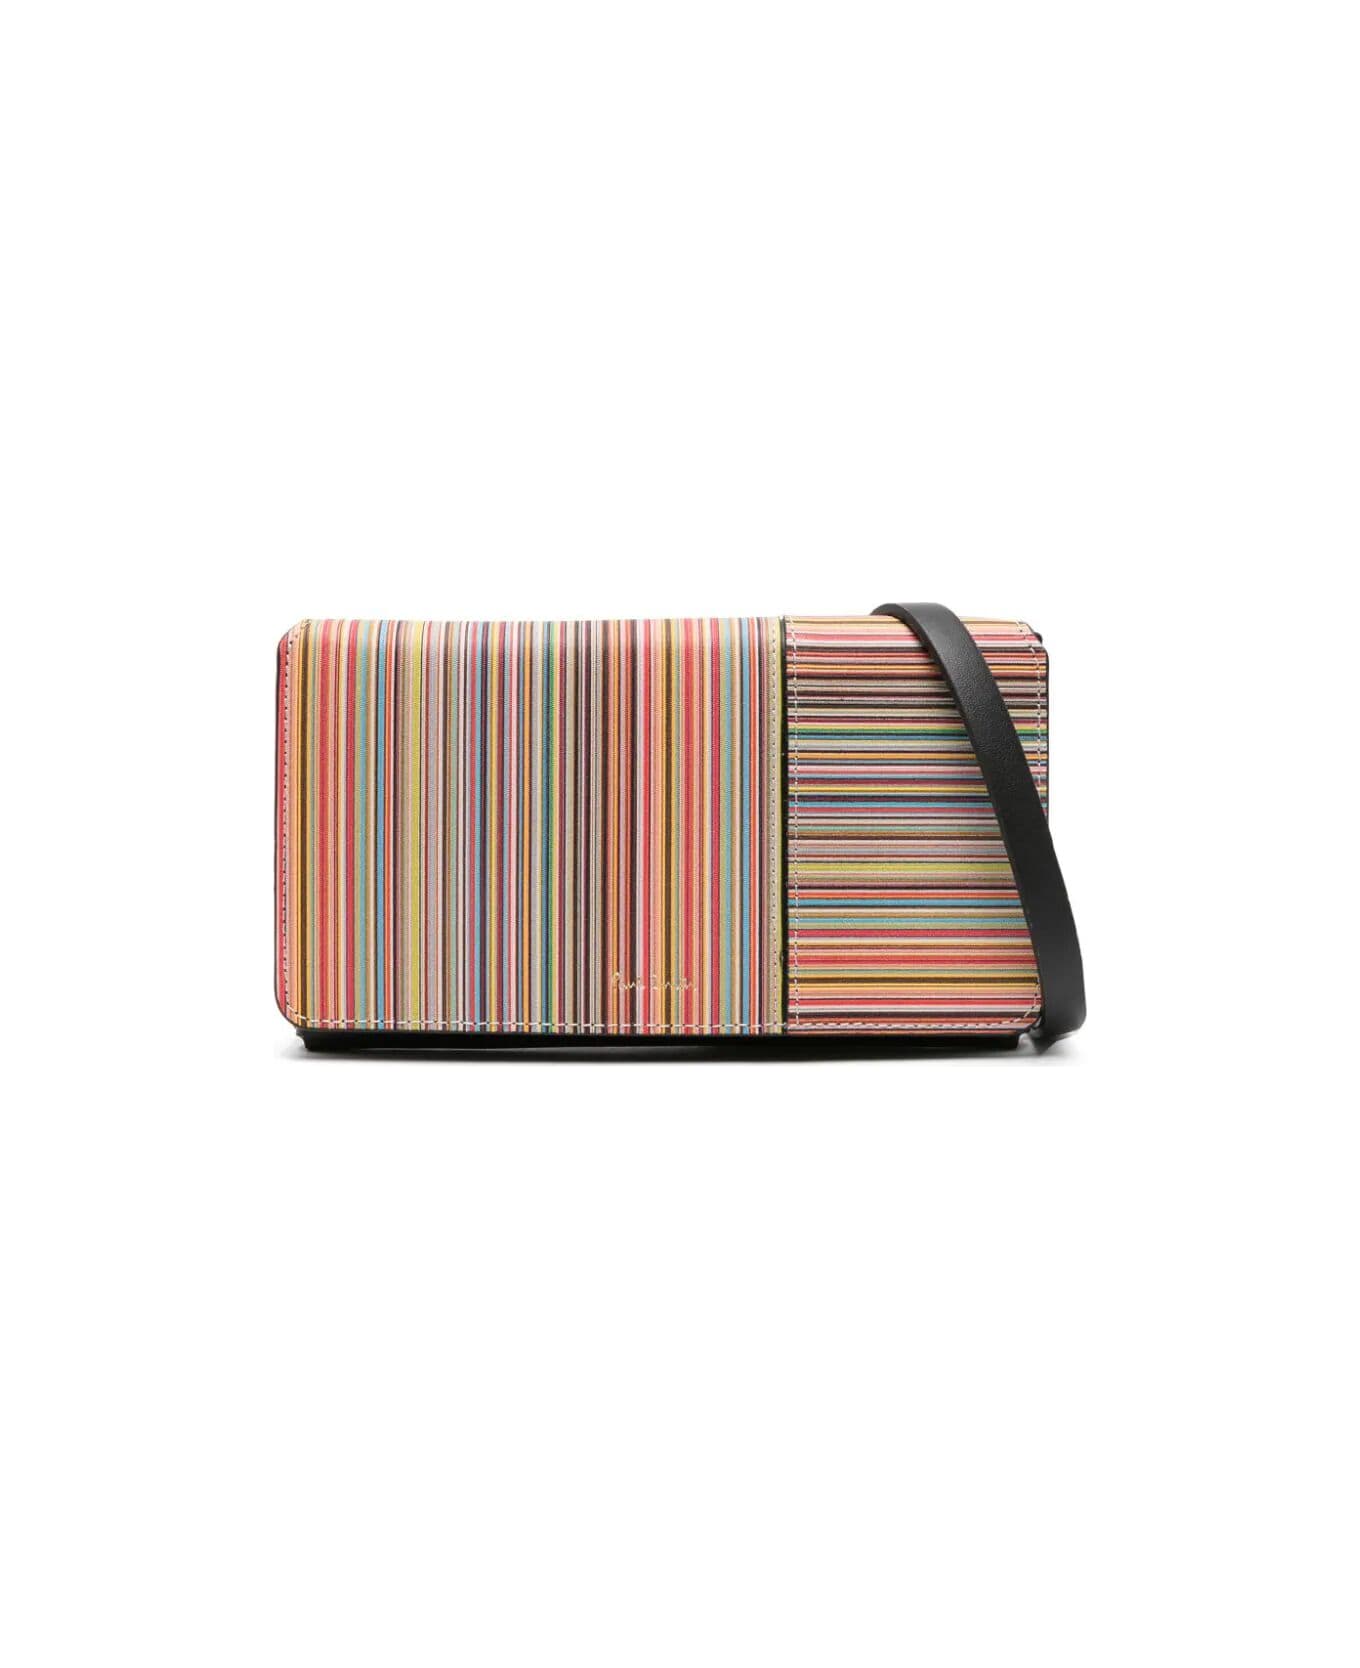 PS by Paul Smith Purse Phone Pouch - Multi